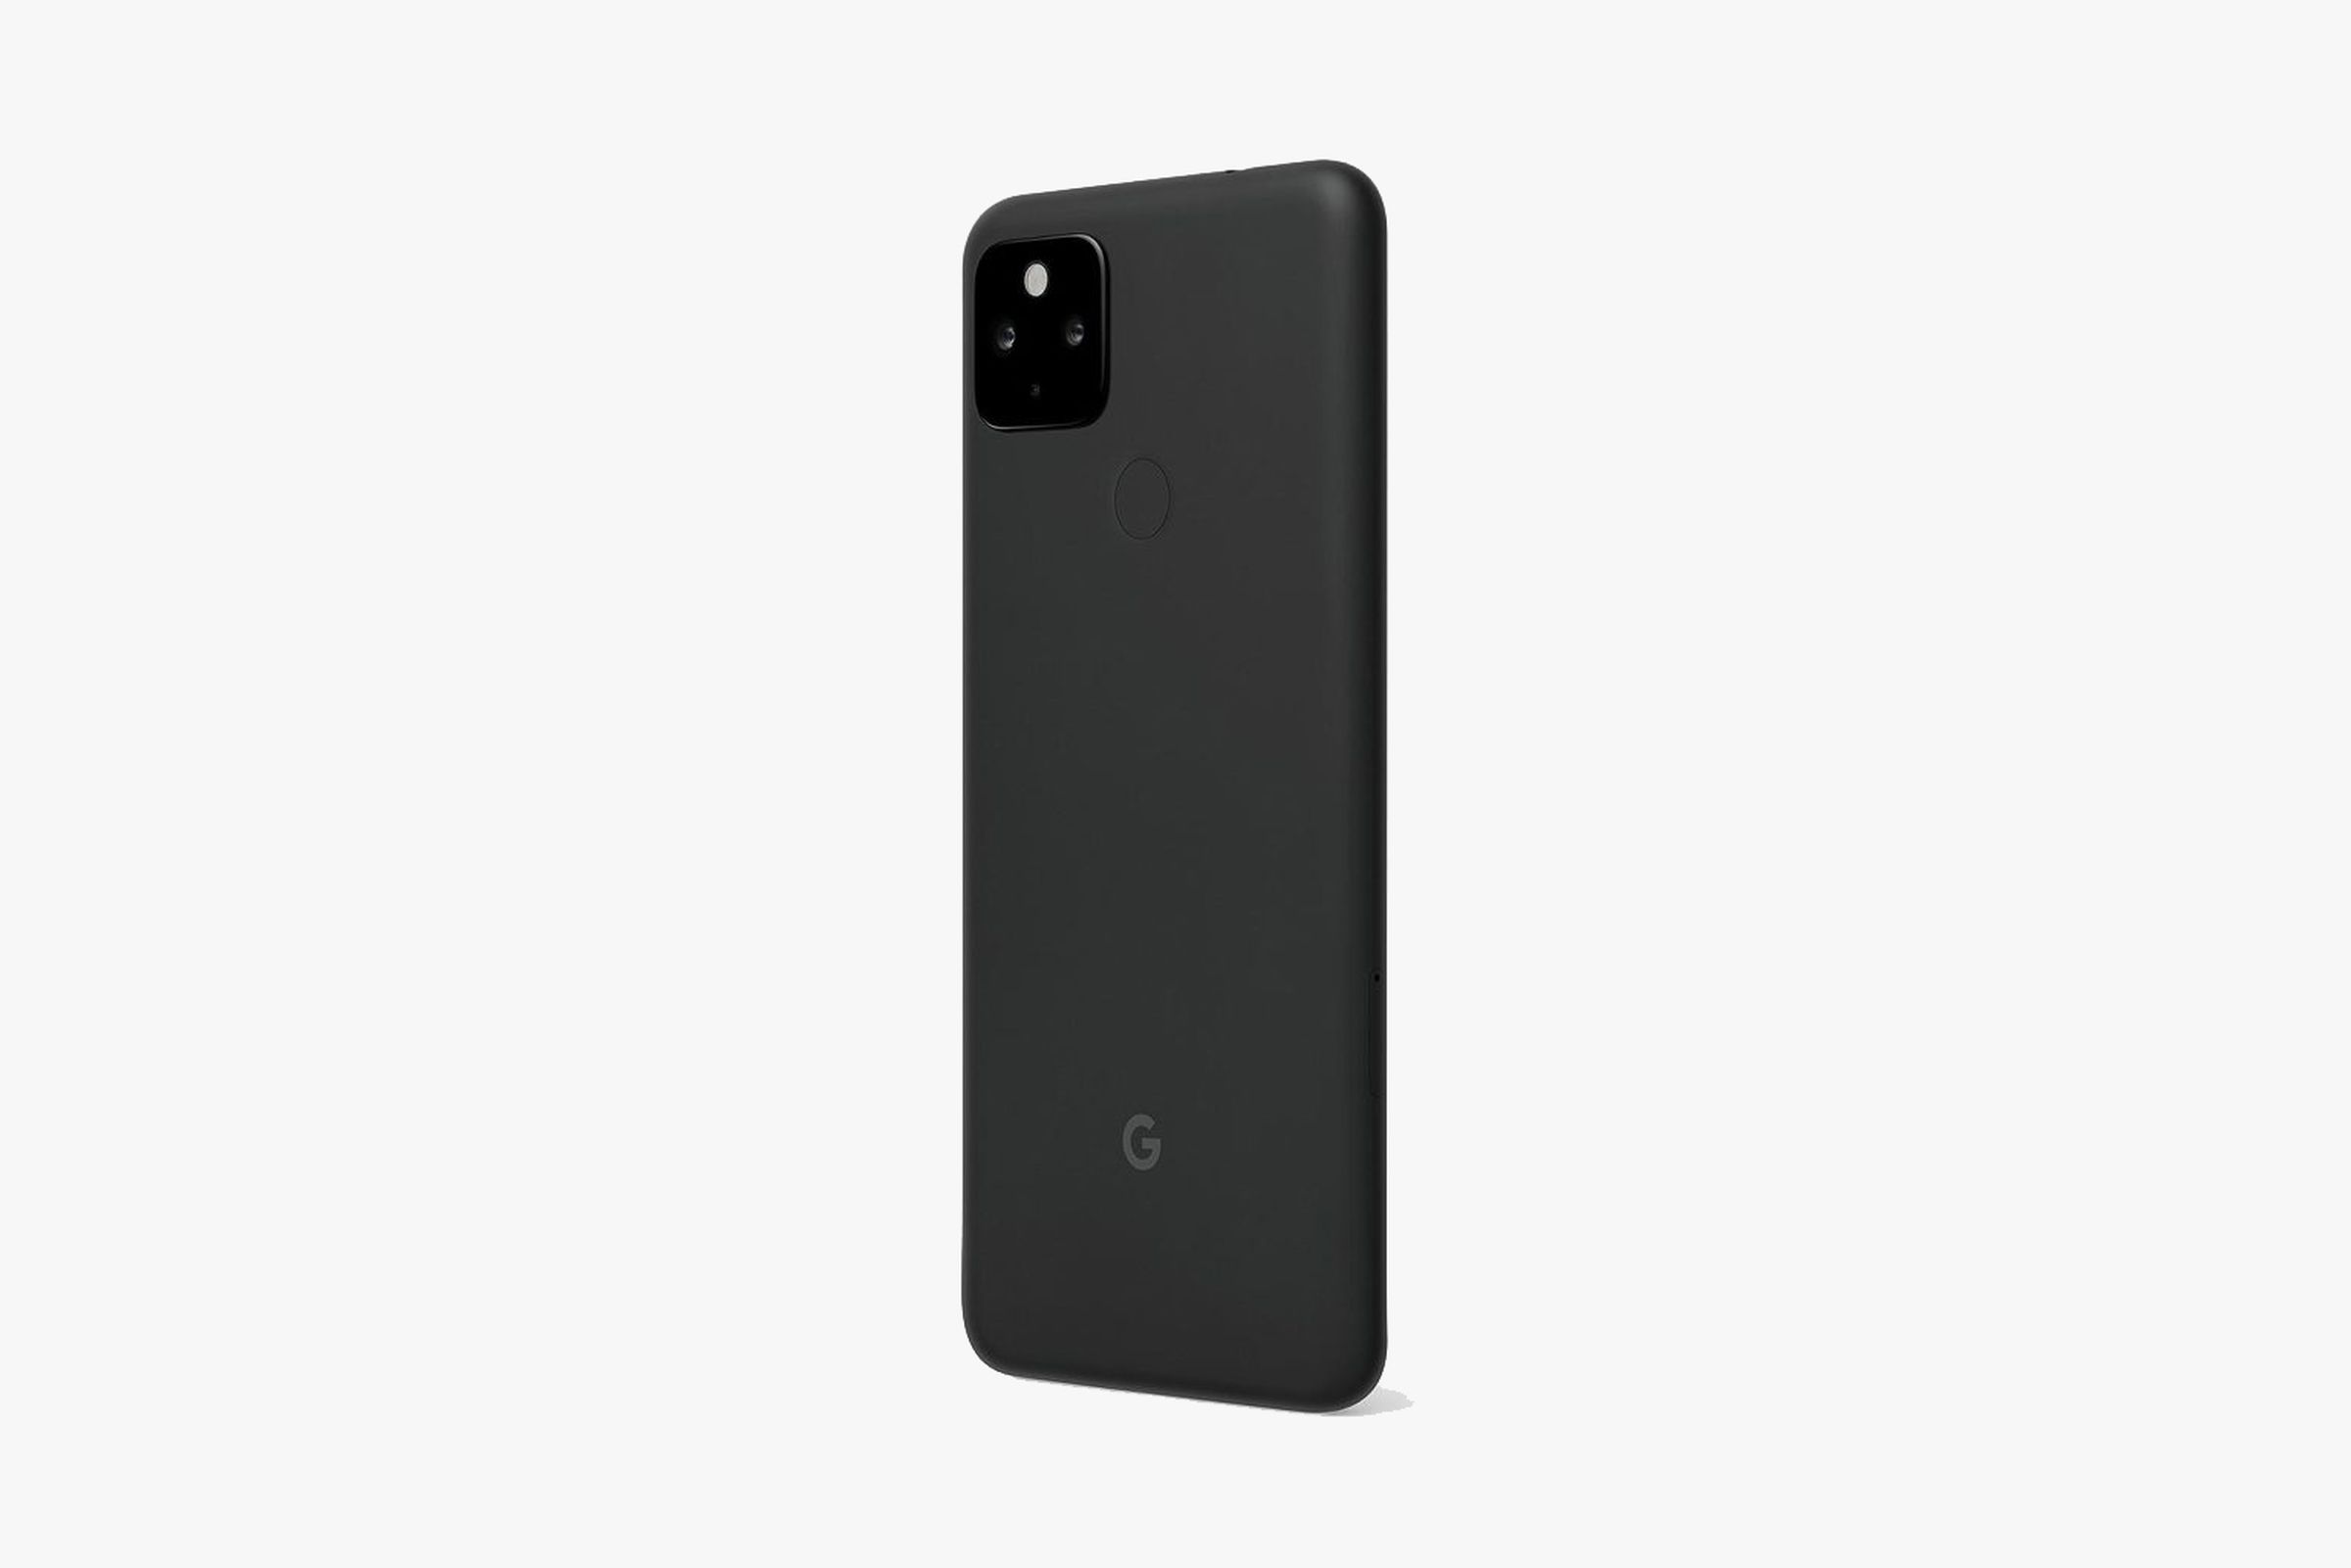 The device shown has a rear-mounted fingerprint sensor, just like the Pixel 4A, and there’s a headphone-jack shaped cutout visible on its top.